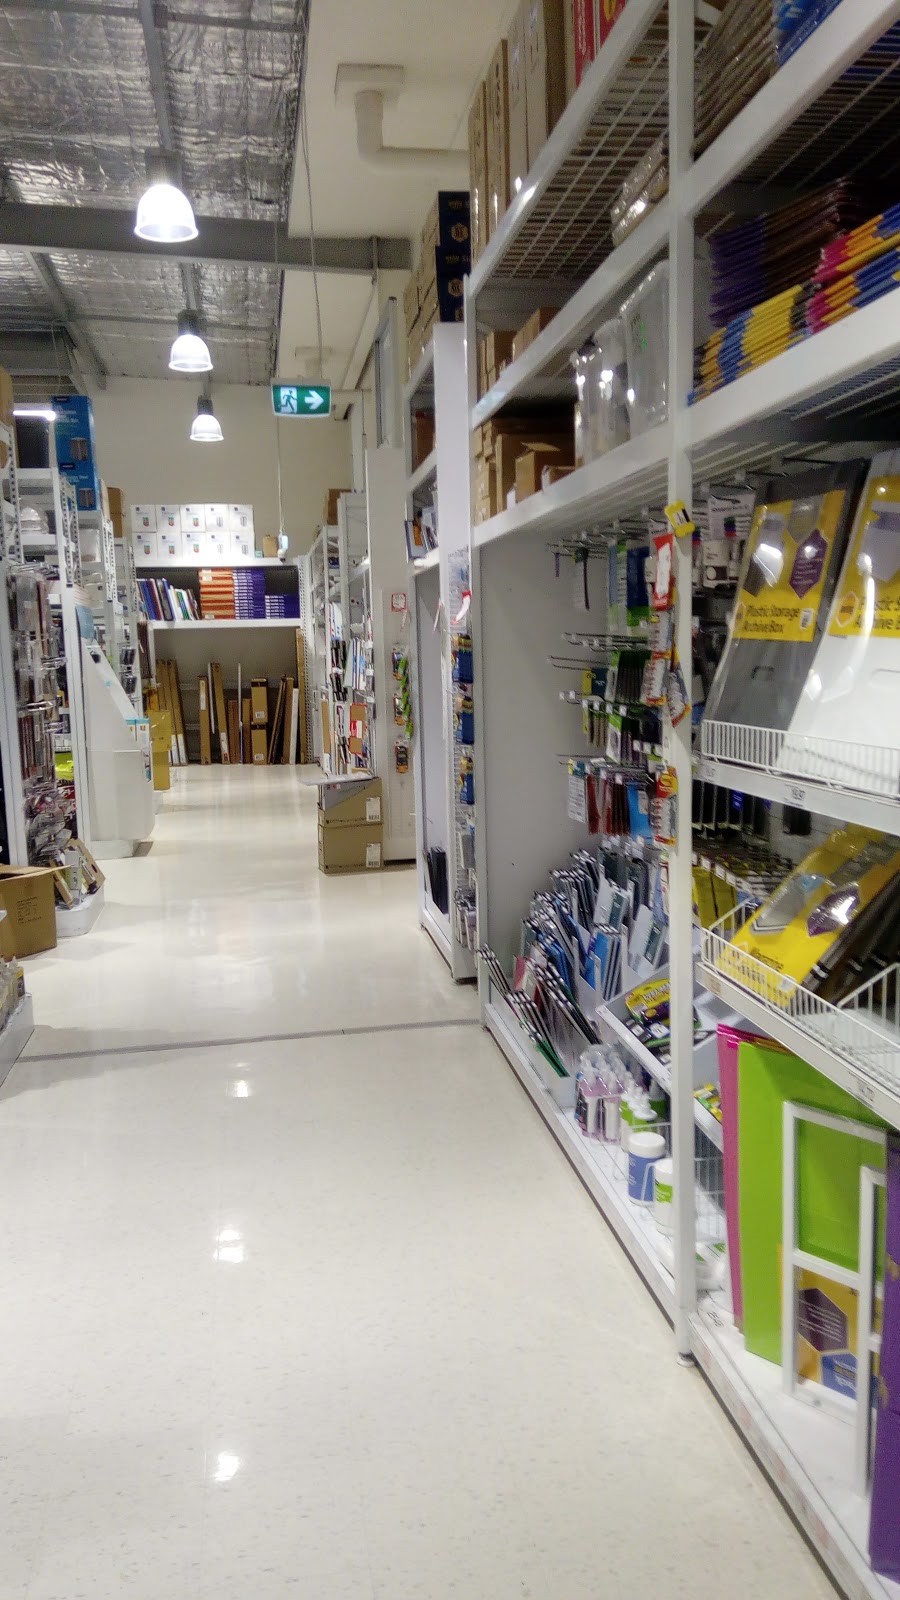 Officeworks Rutherford | electronics store | 13 Racecourse Rd, Rutherford NSW 2320, Australia | 0240155100 OR +61 2 4015 5100